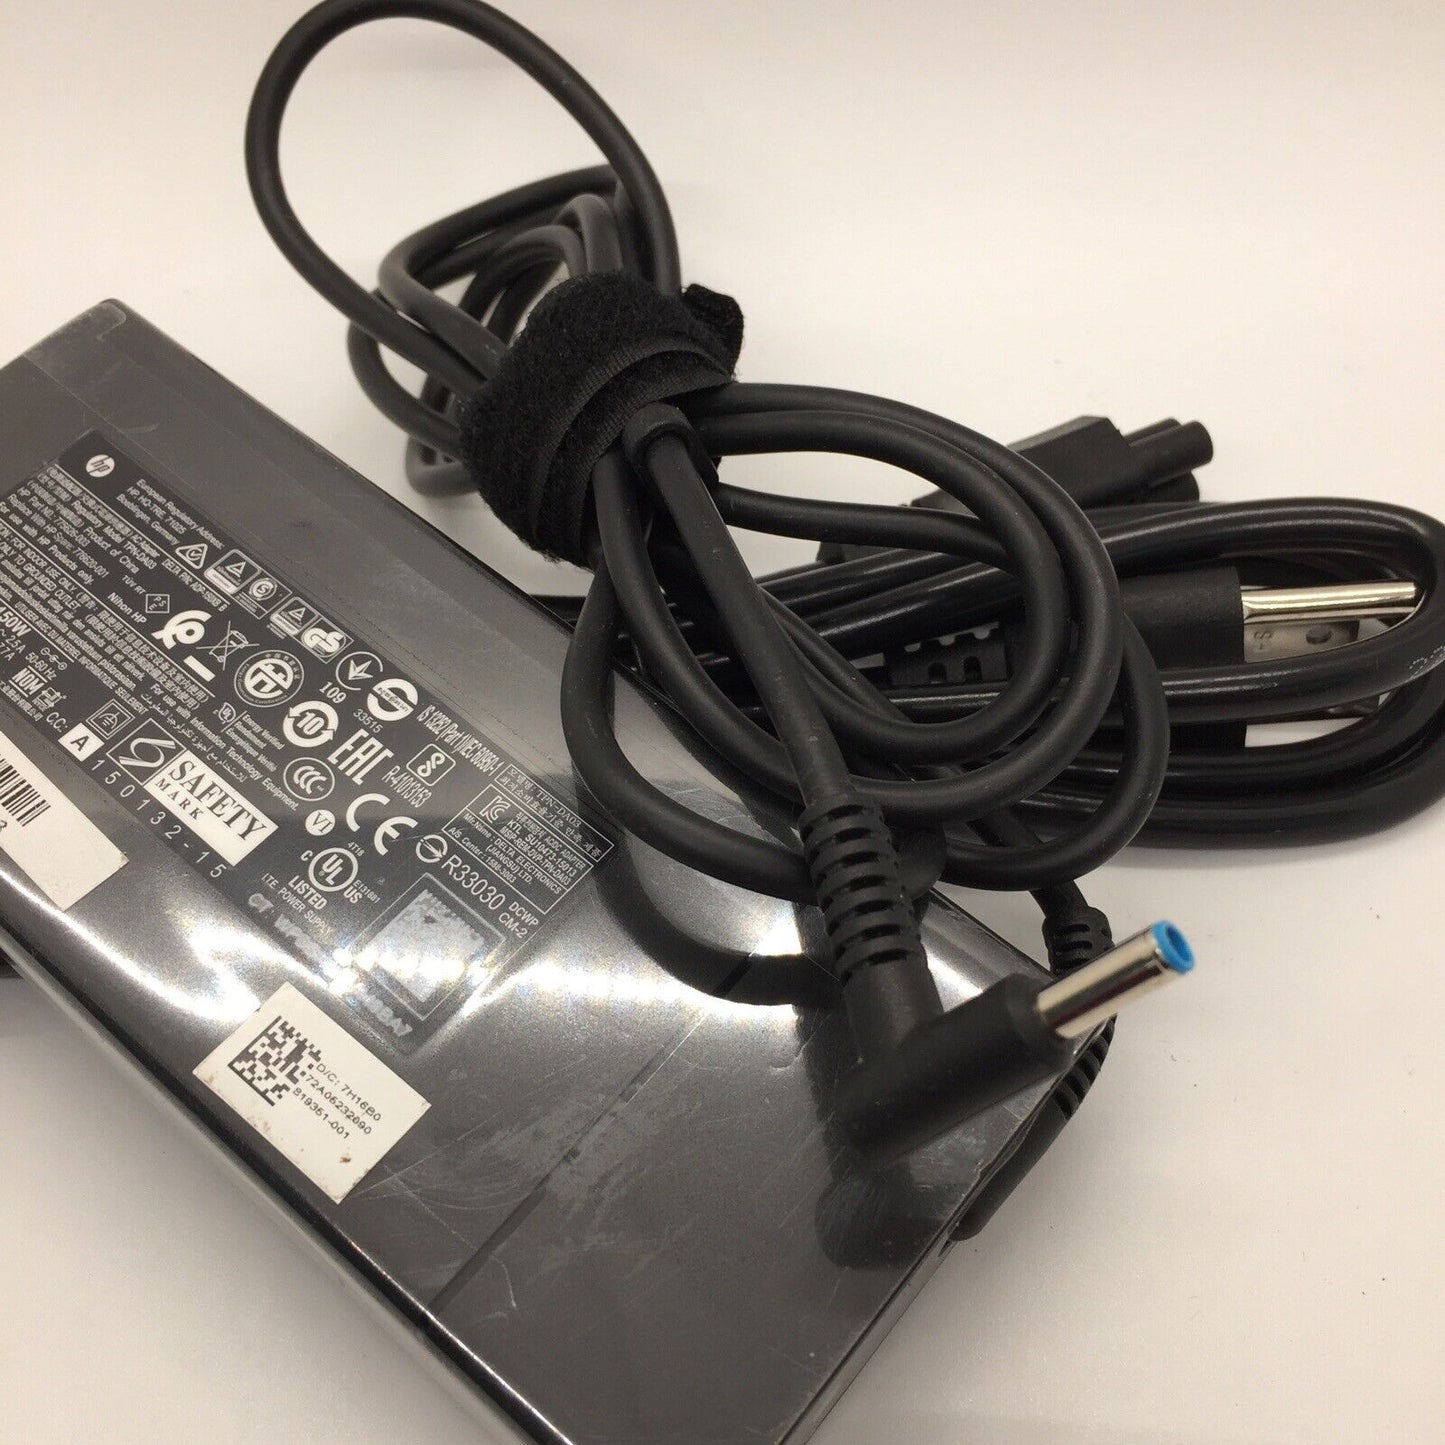 HP 776620-001 150W 19.5V 7.7A 3.0mm Blue Tip AC Adapter For HP ZBook 15